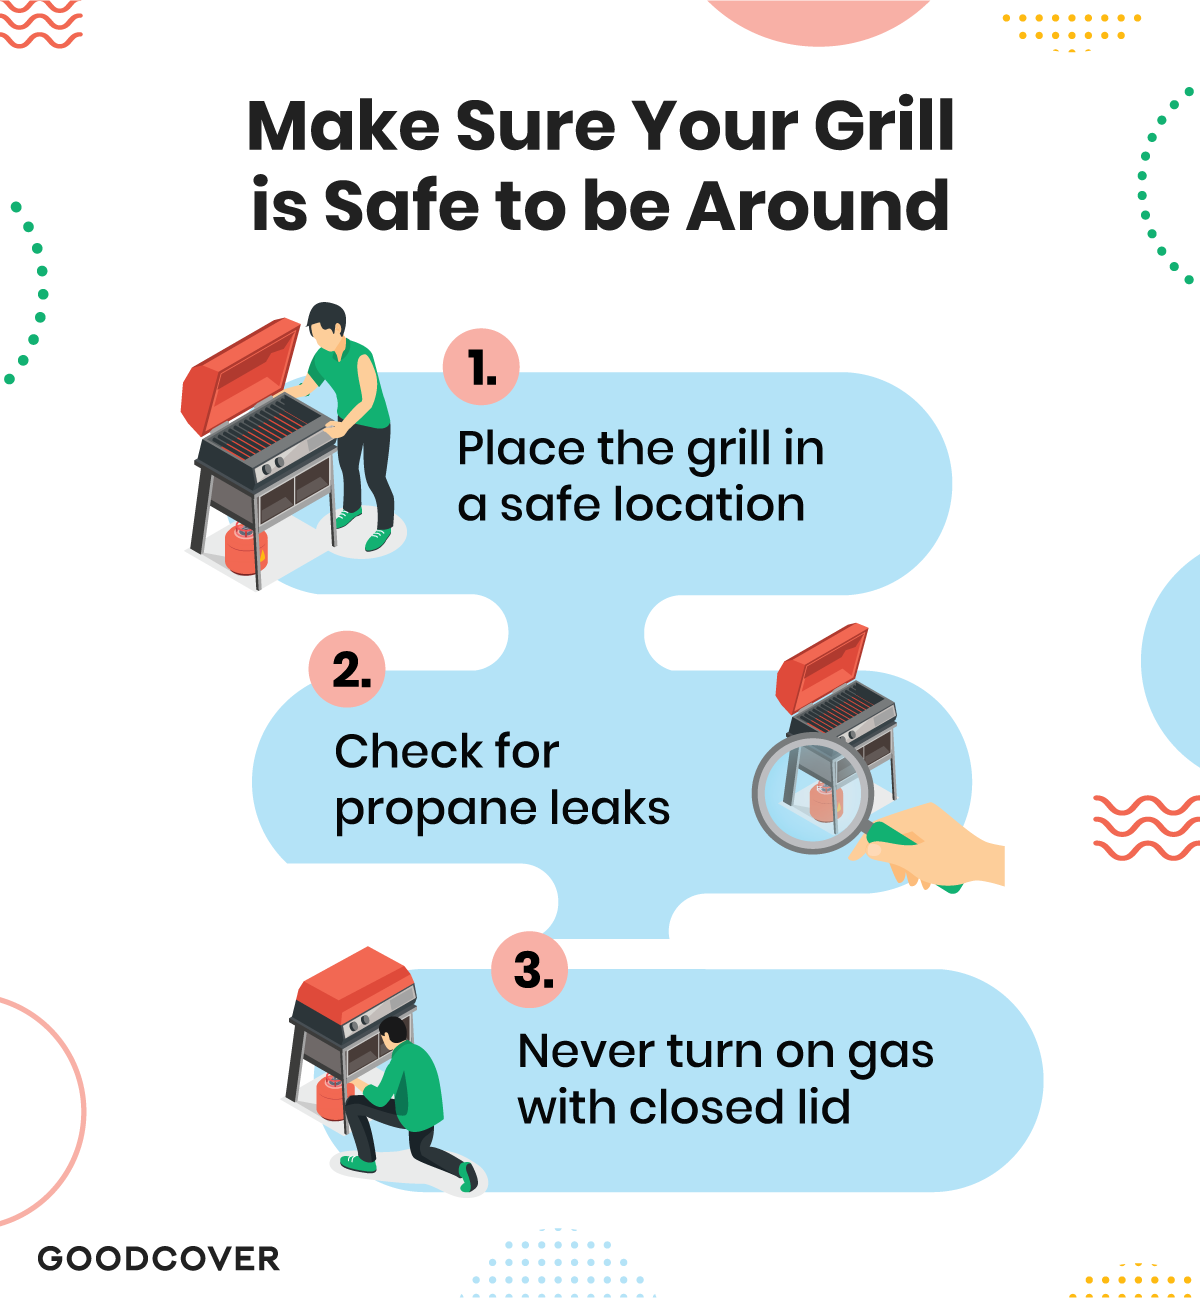 Place the grill safely away from the house’s structure and flammable objects.